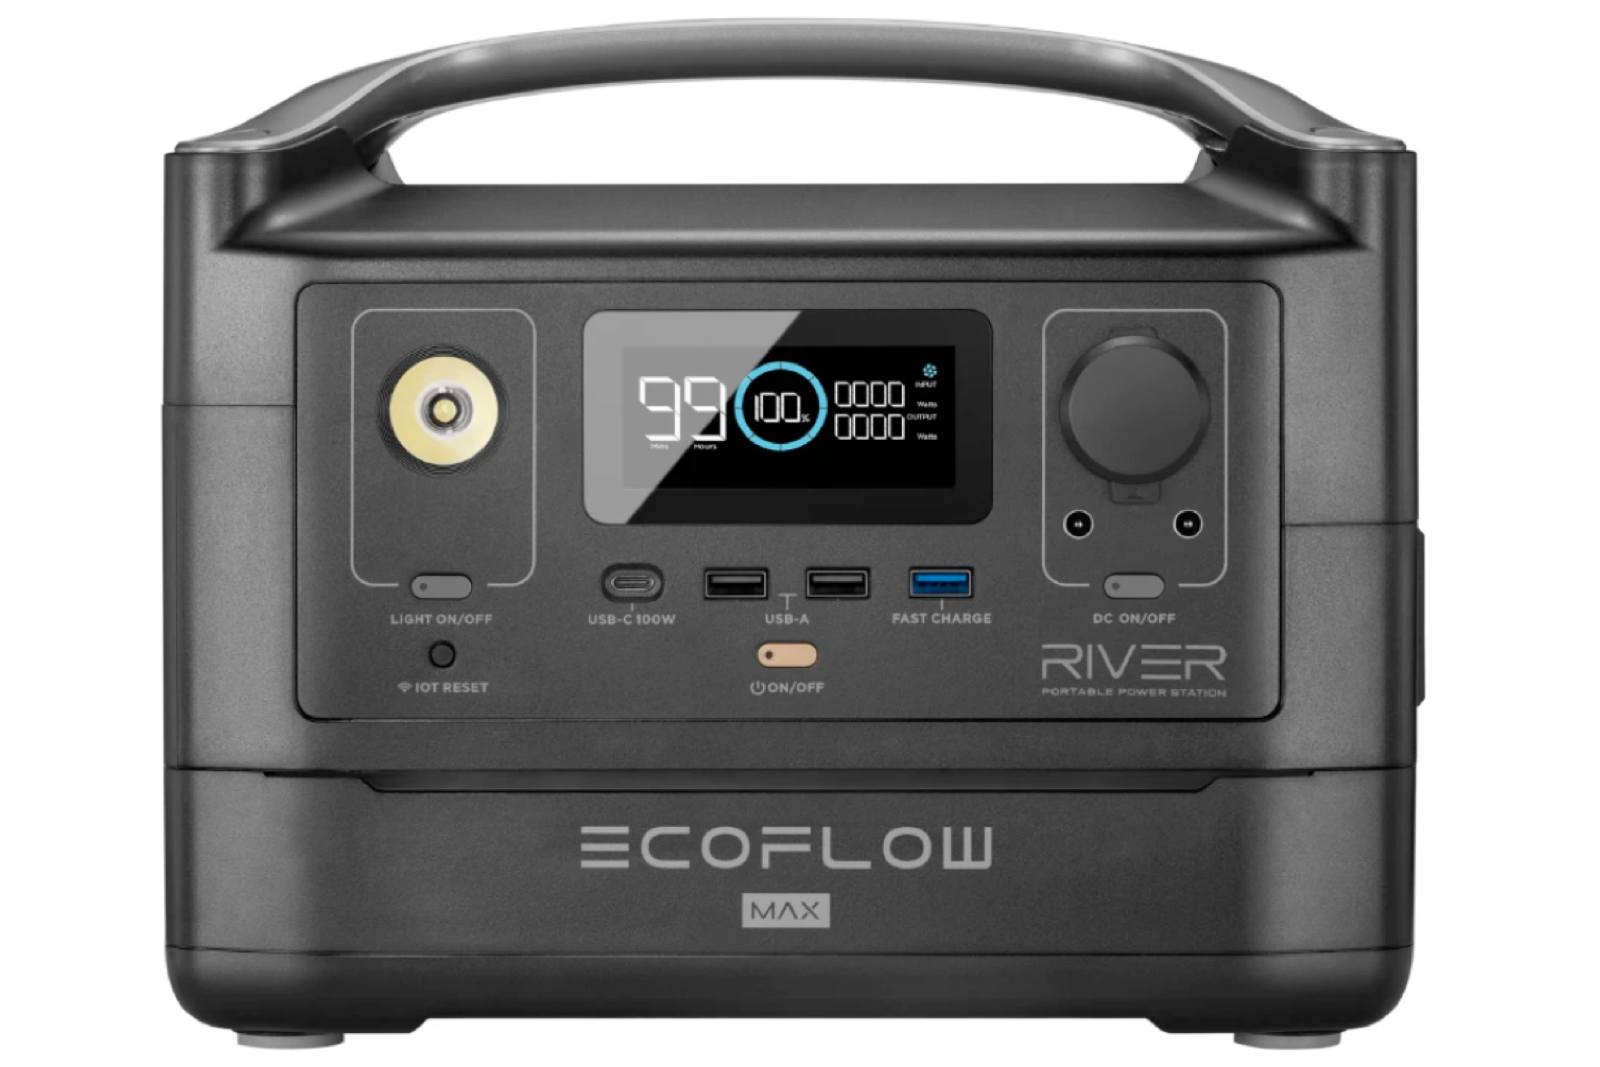 Now's your chance to get an EcoFlow power station at a great deal photo 1